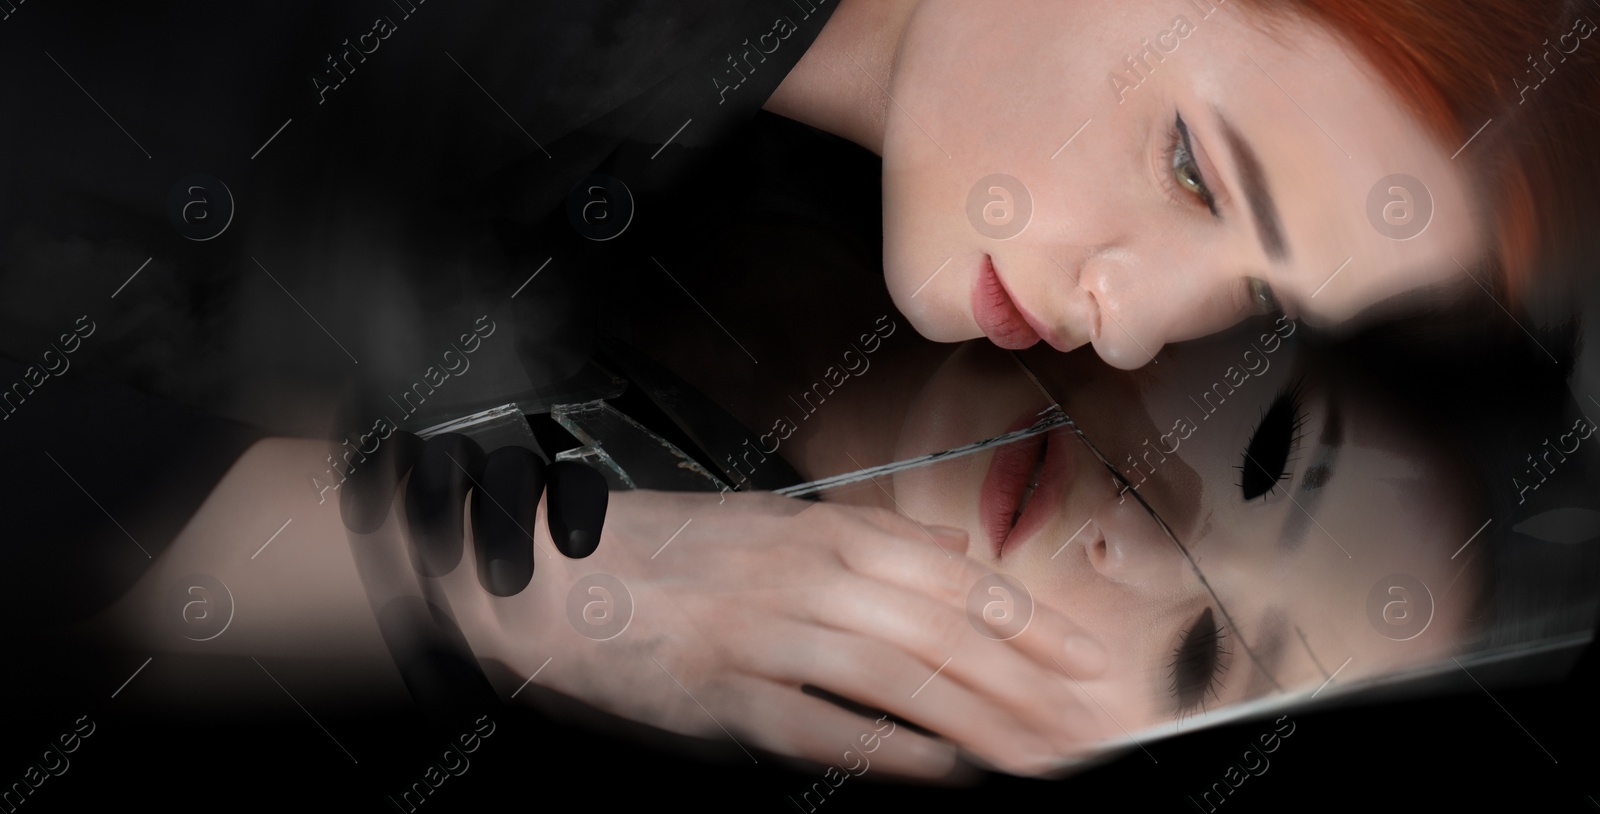 Image of Suffering from hallucinations. Woman lying on broken mirror, demon in reflection touching her hand